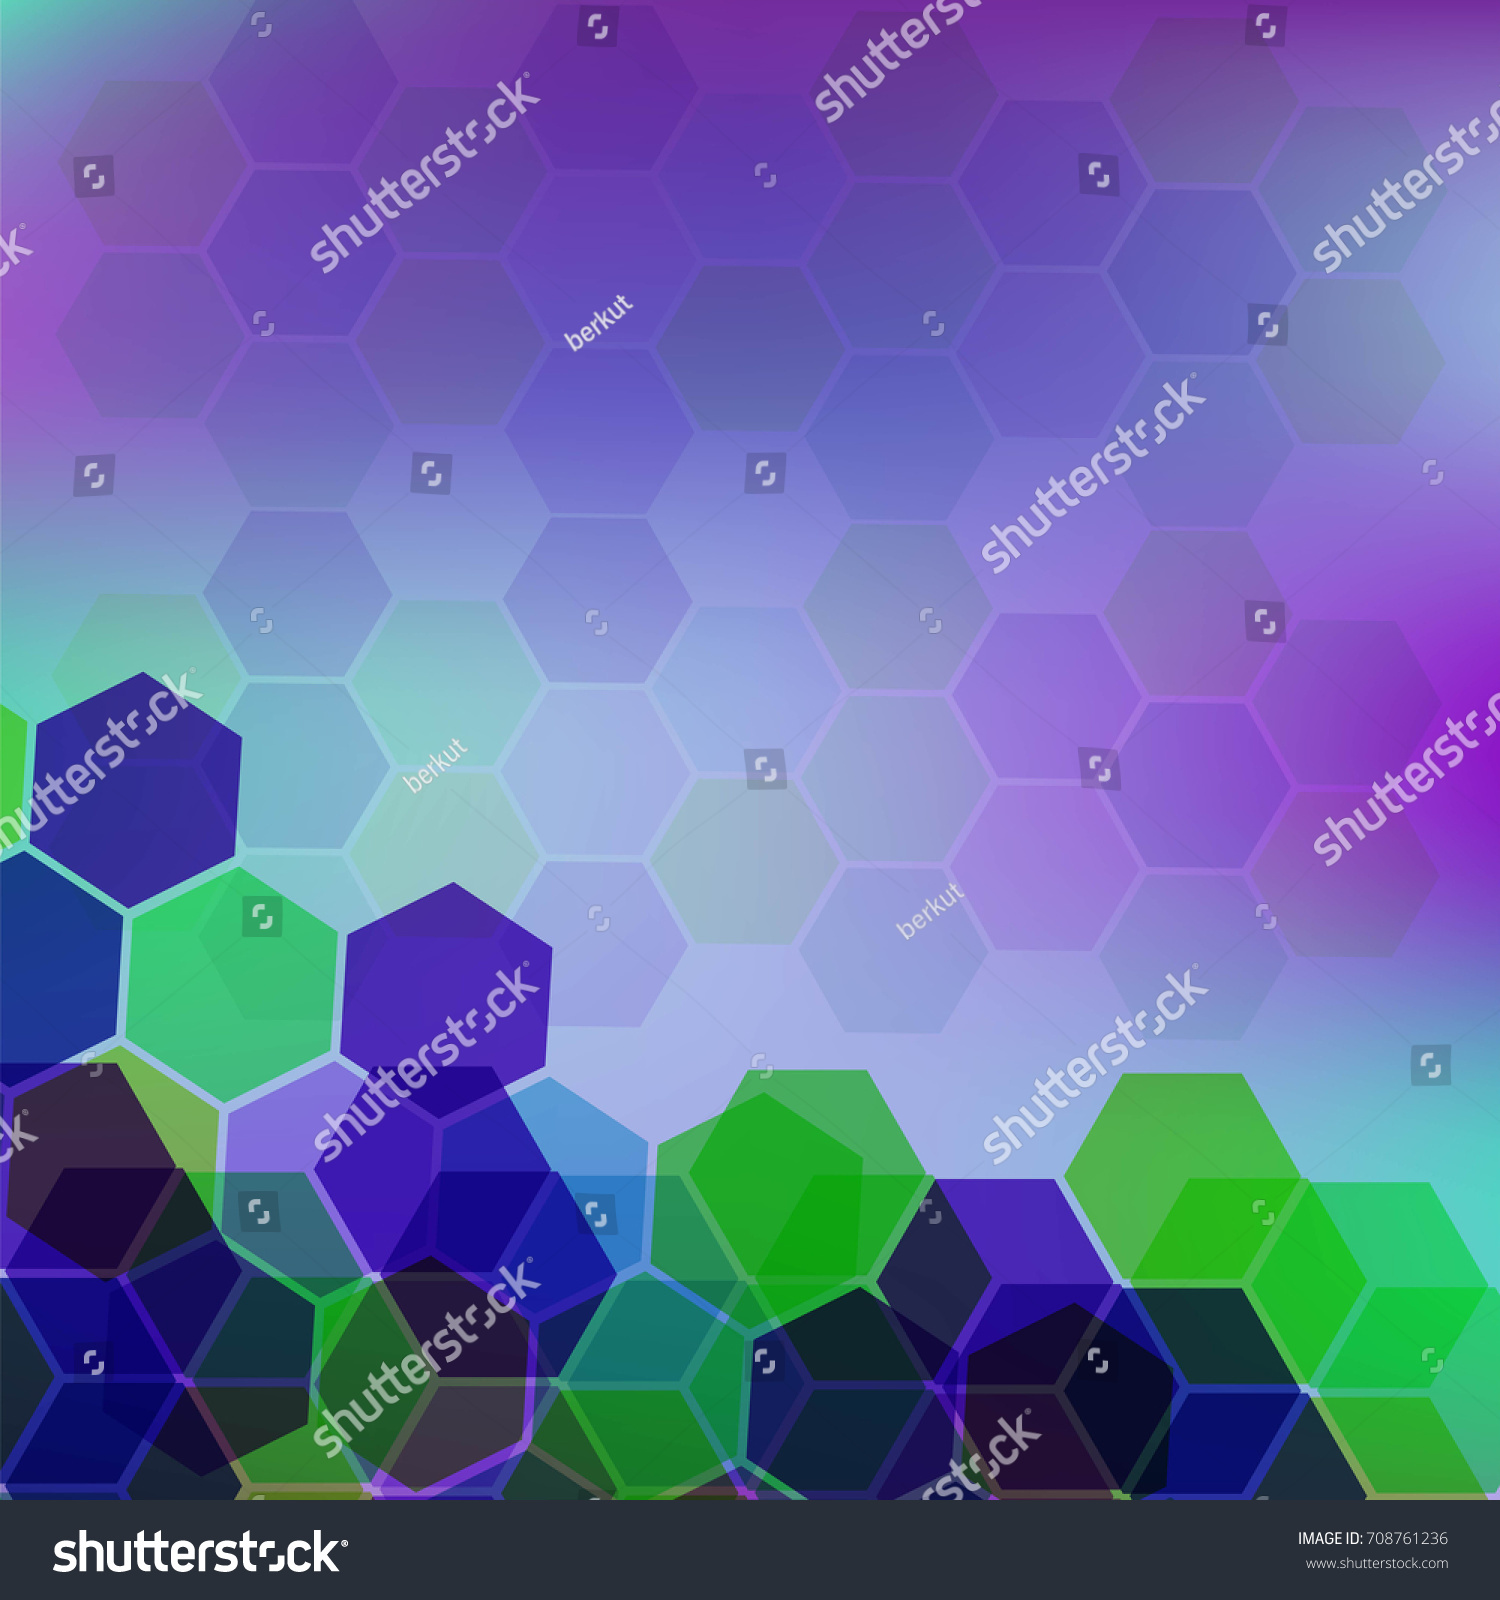 Abstract Background Geometric Pattern Stock Vector 708761236 ...